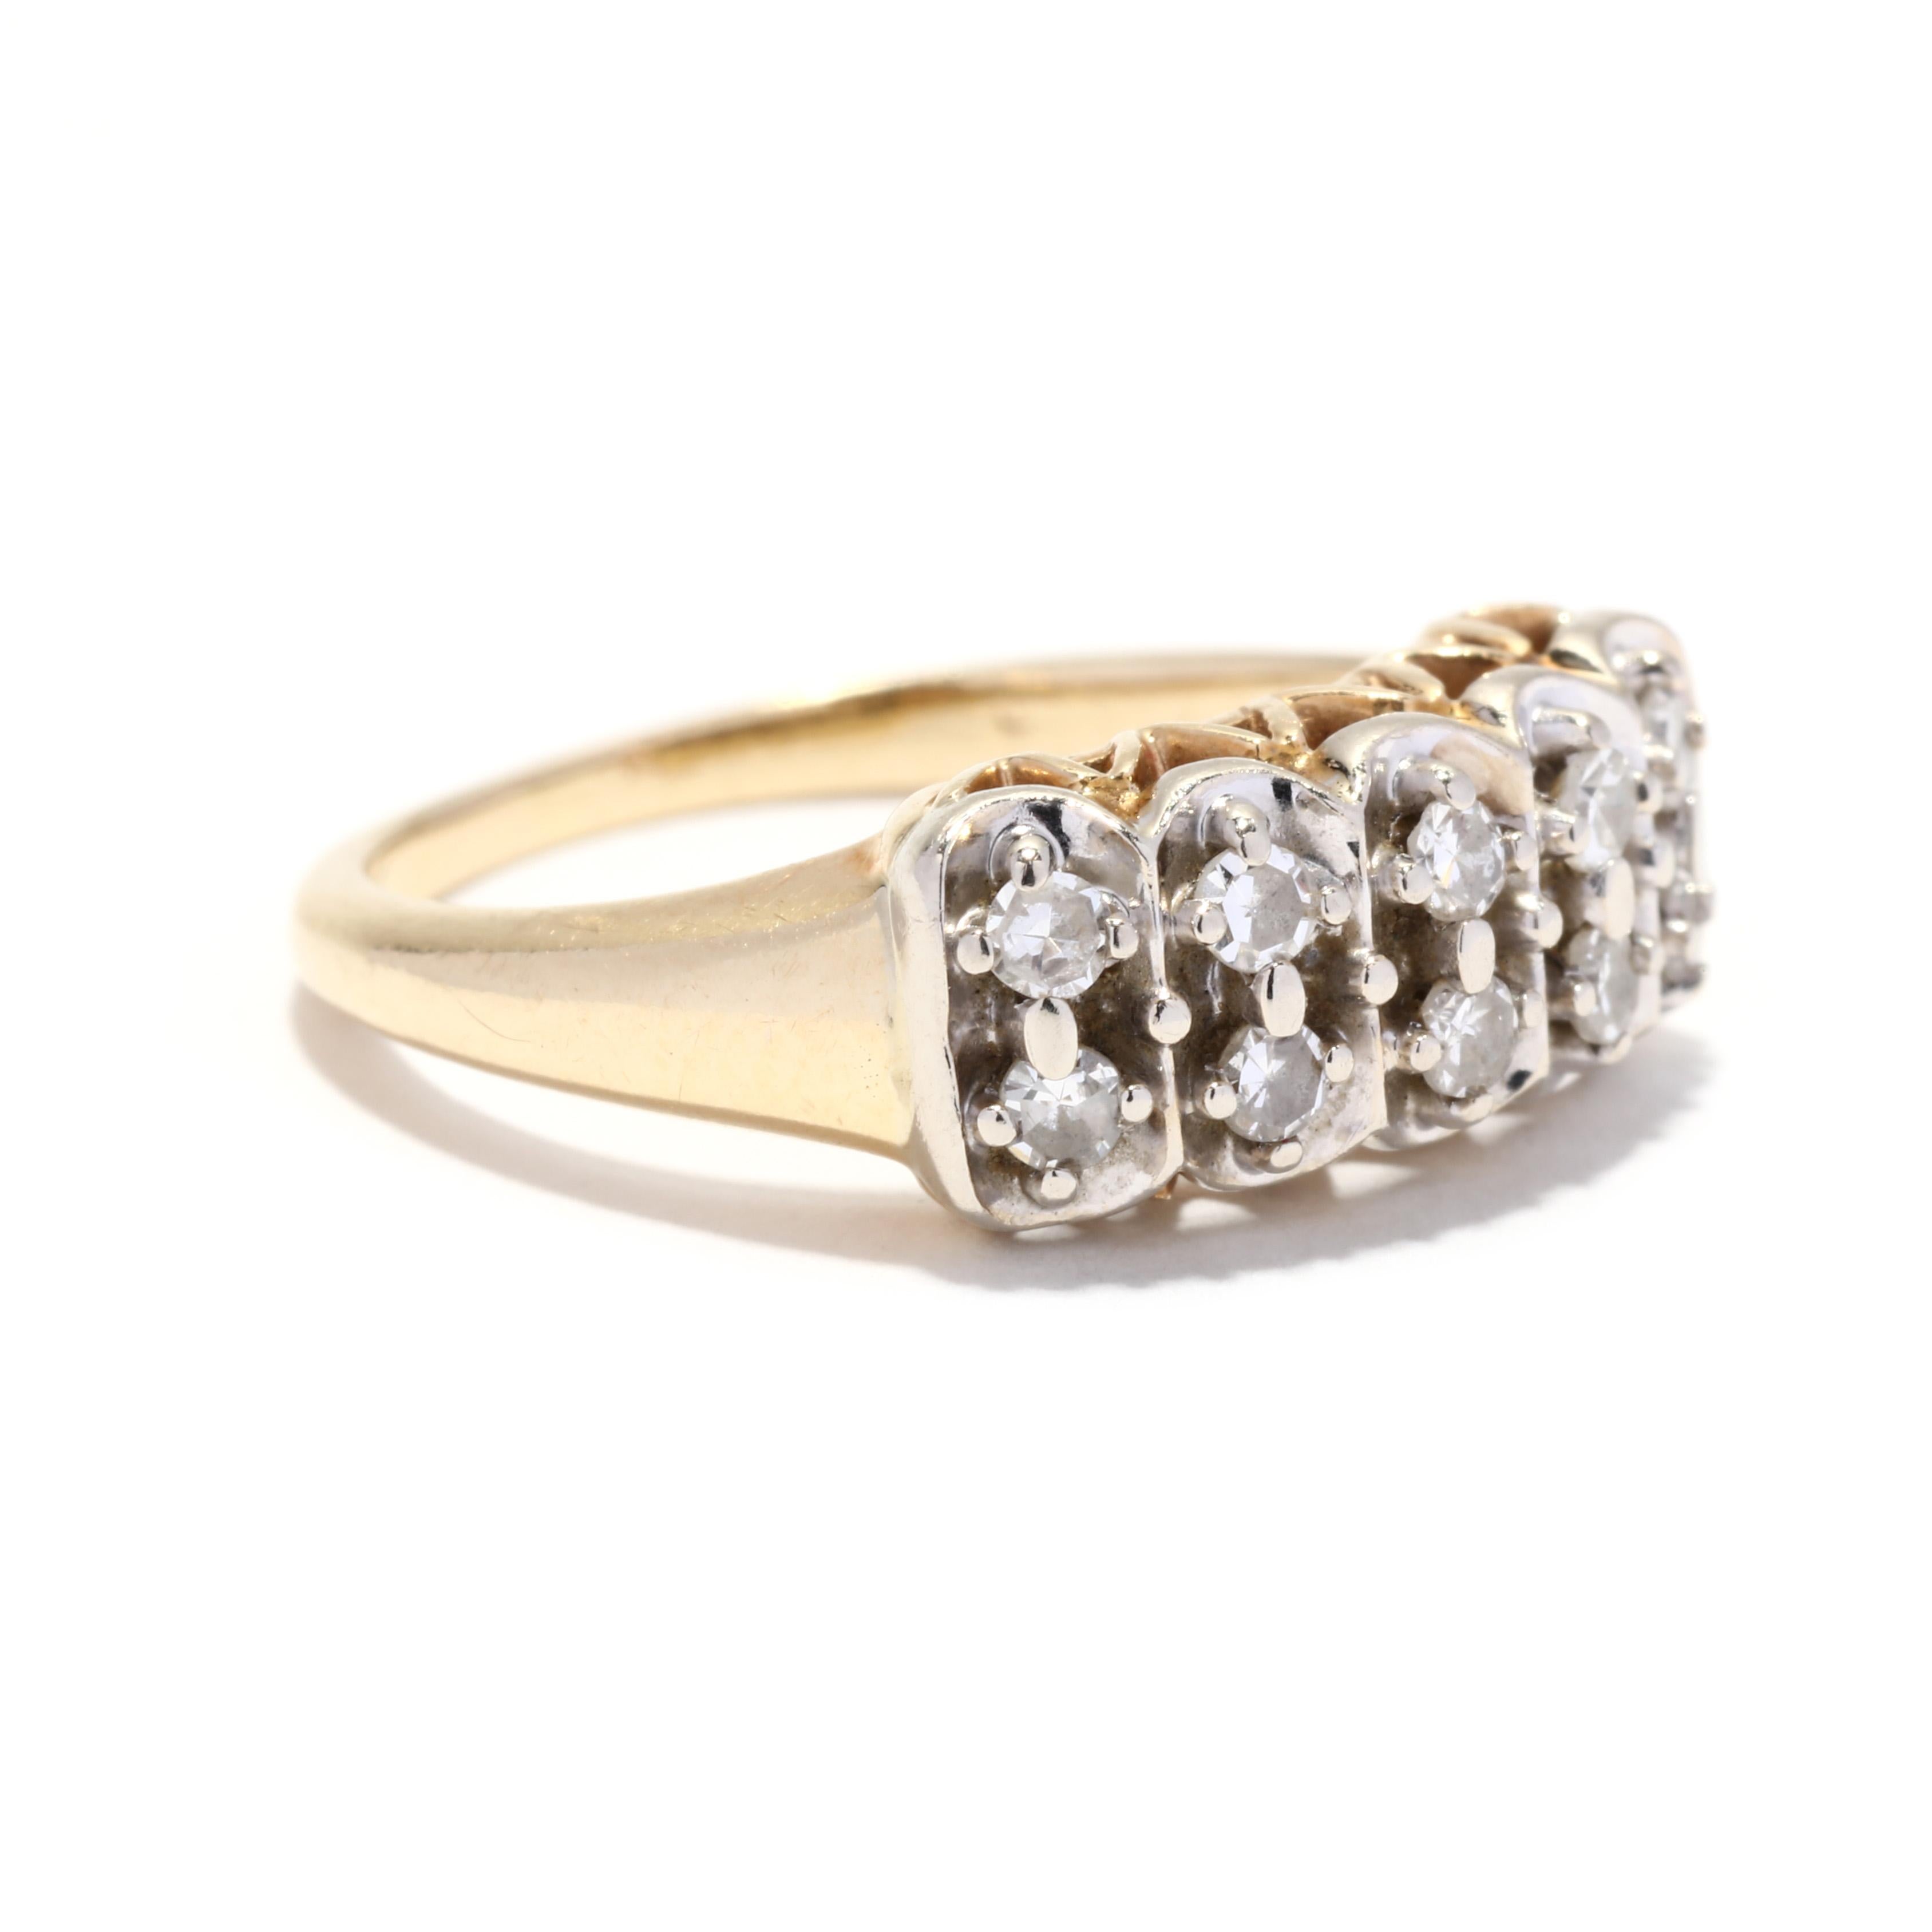 A vintage 14 karat yellow and white gold diamond band. This two row band features two rows of single cut round diamonds weighing approximately .20 total carats set in white gold and with a tapered yellow god band.

Stones:
- diamonds, 10 stones
-